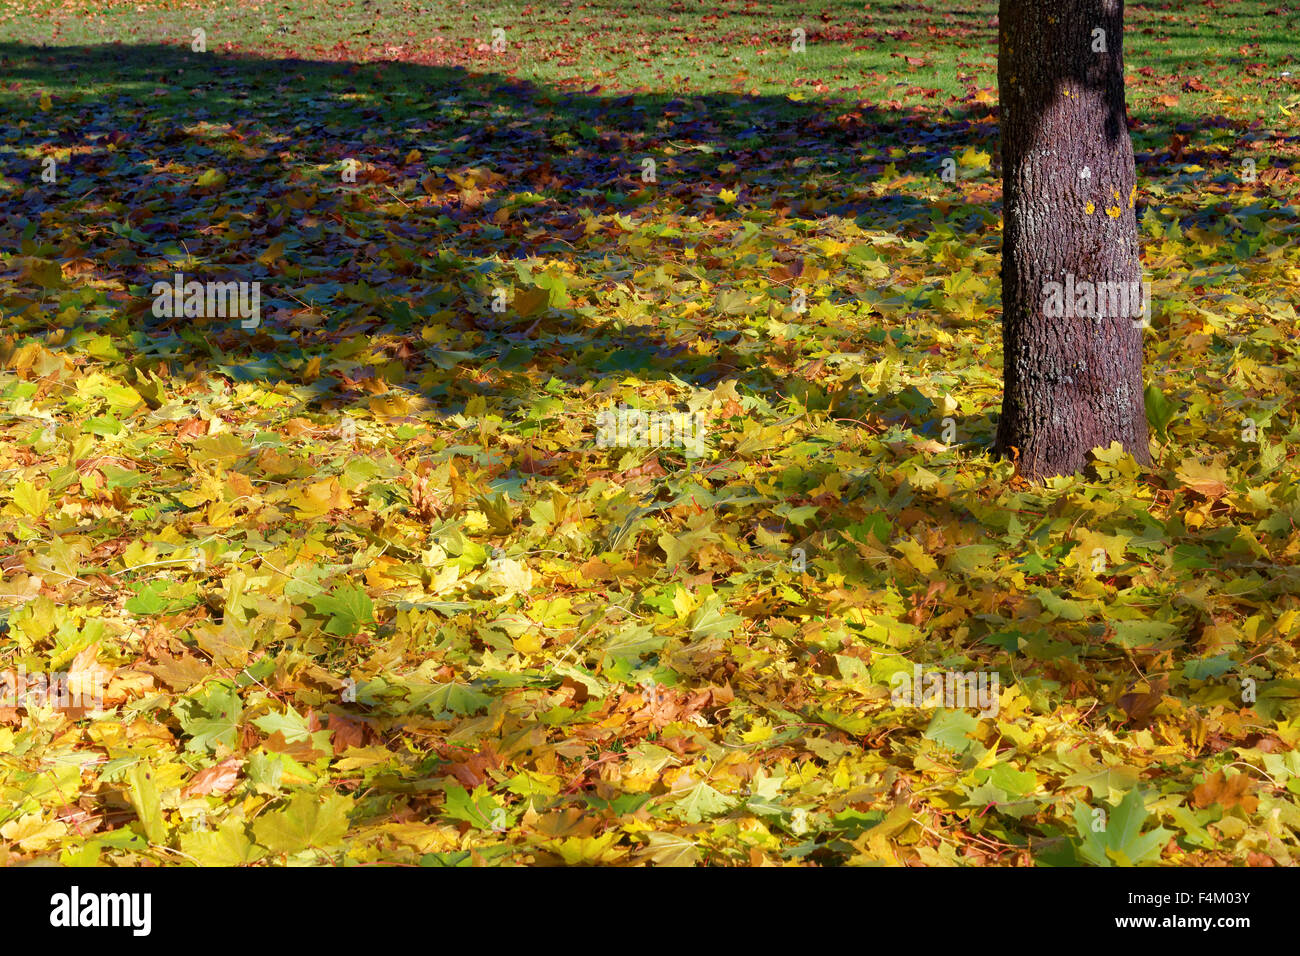 Colorful maple leaves fallen to ground under maple trees in October. Stock Photo